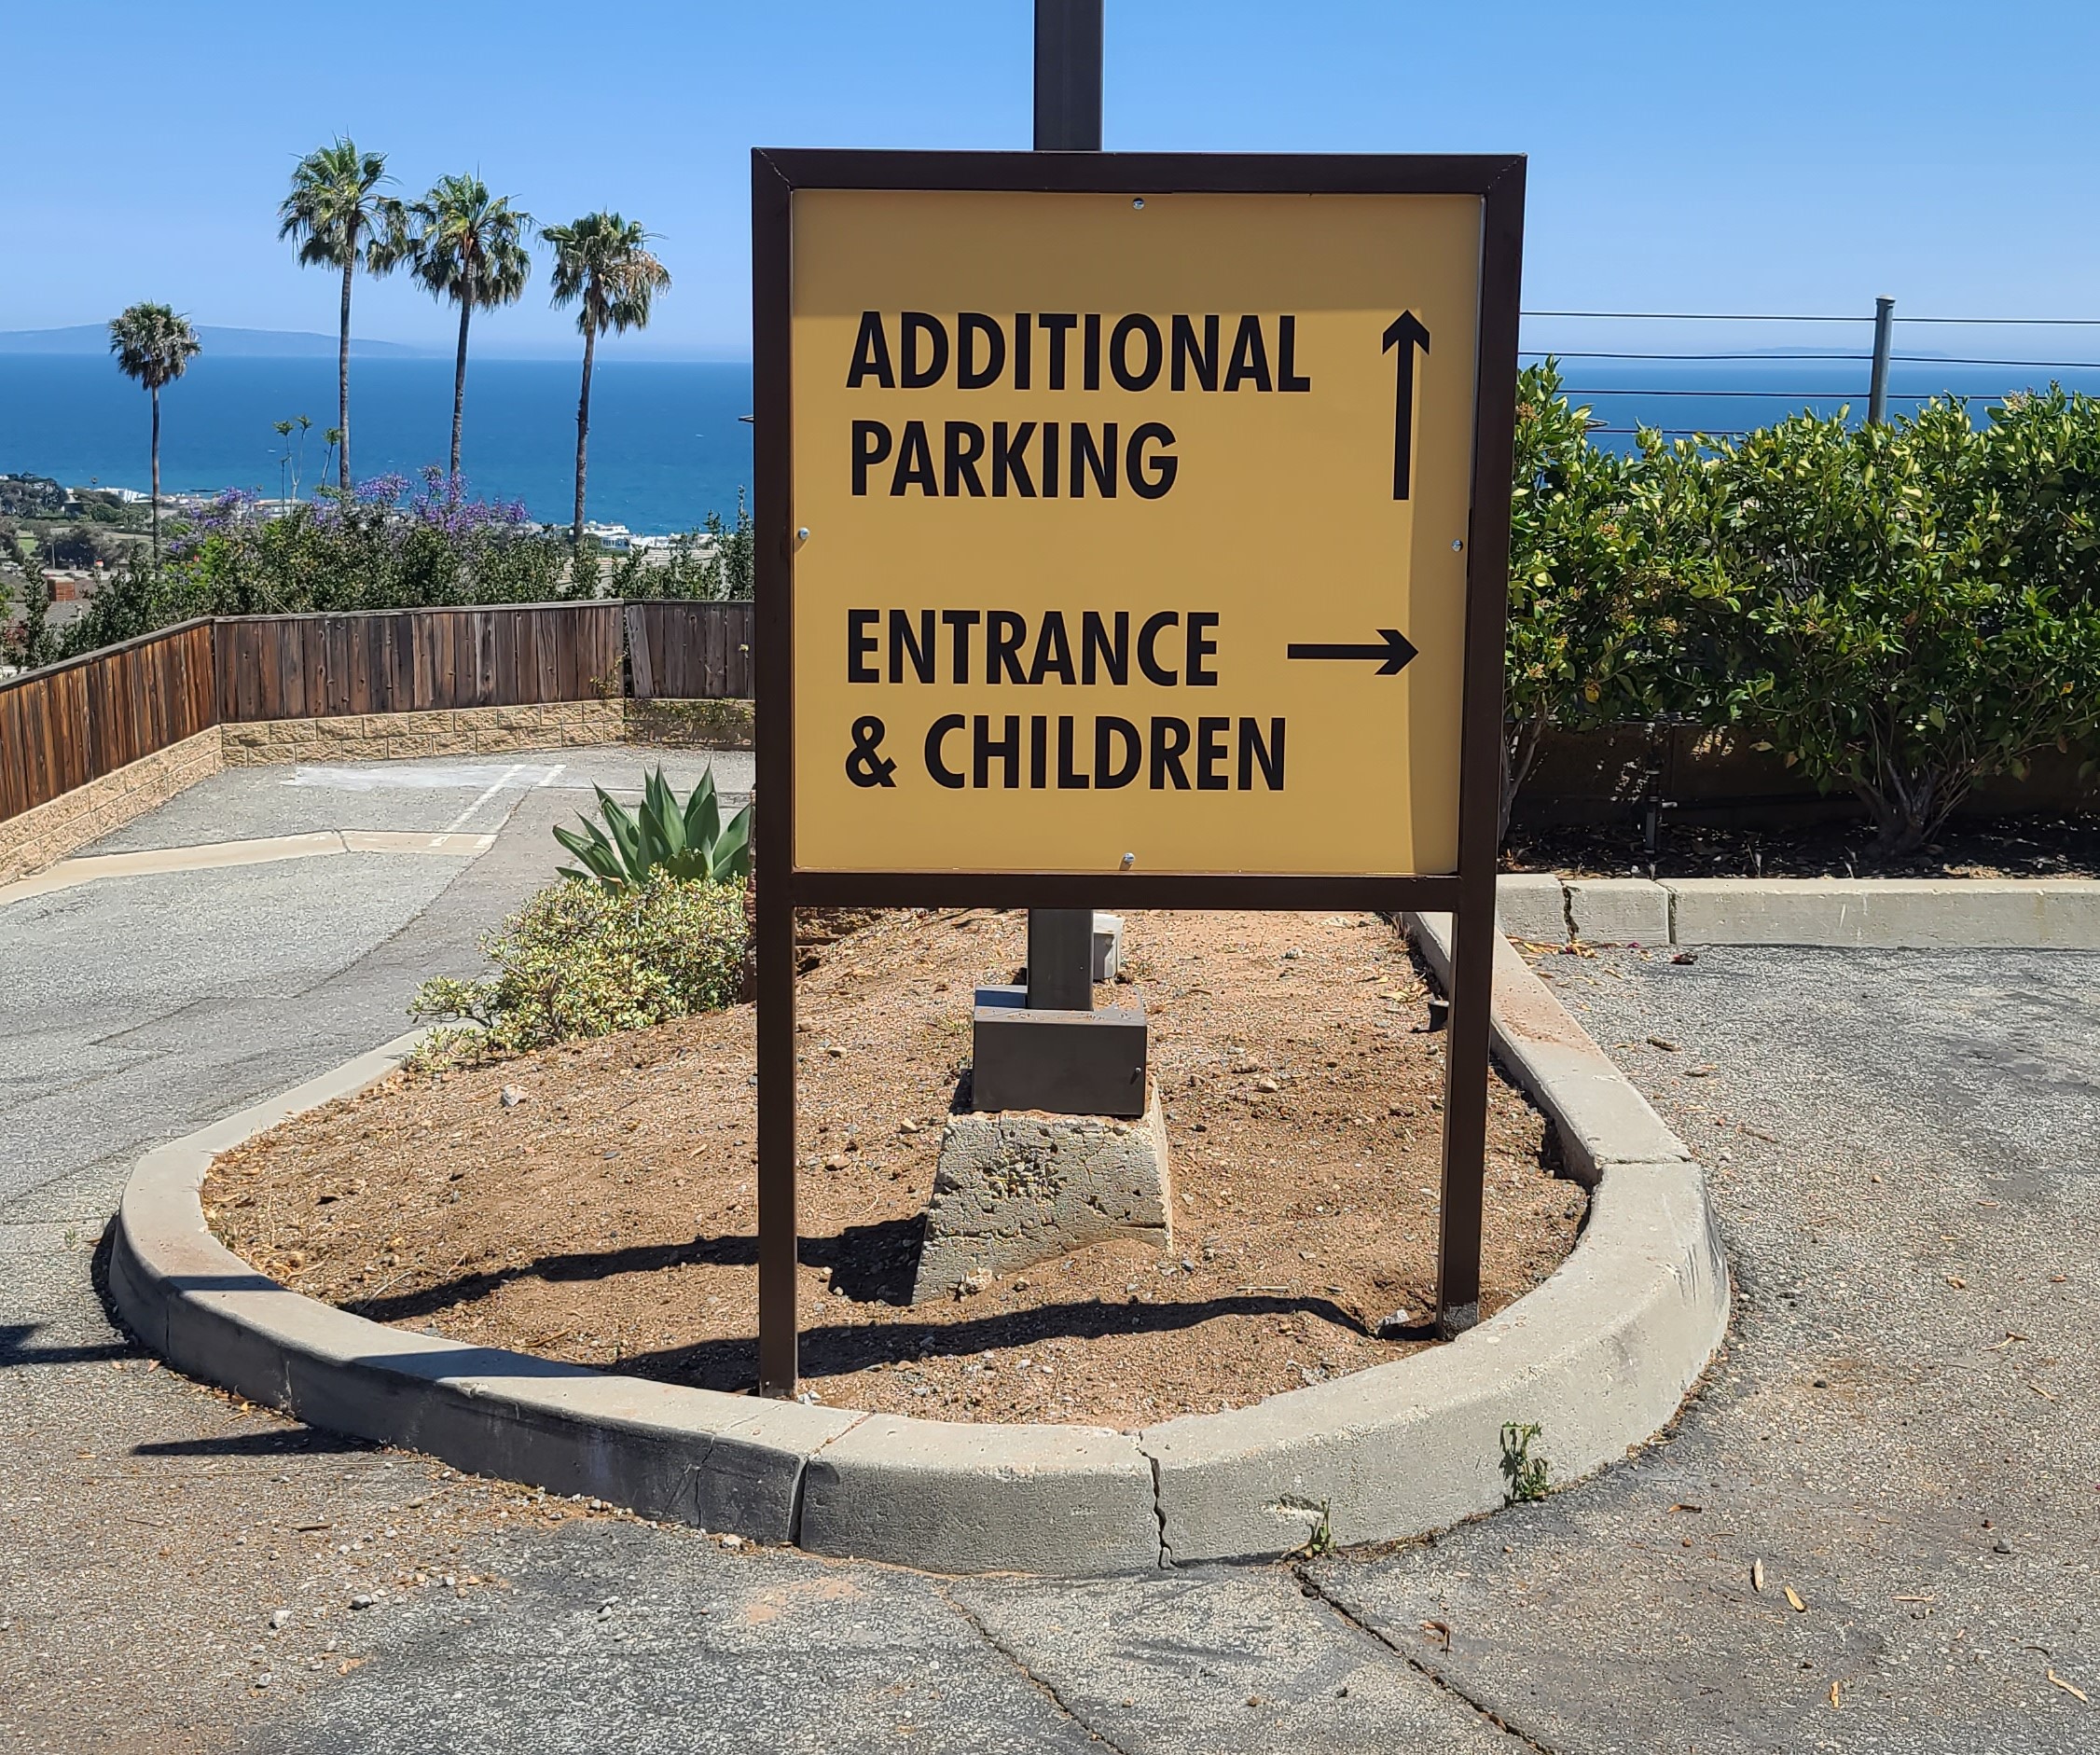 These additional parking signs for our friends at Malibu Pacific Church are part of our comprehensive sign package for their location.